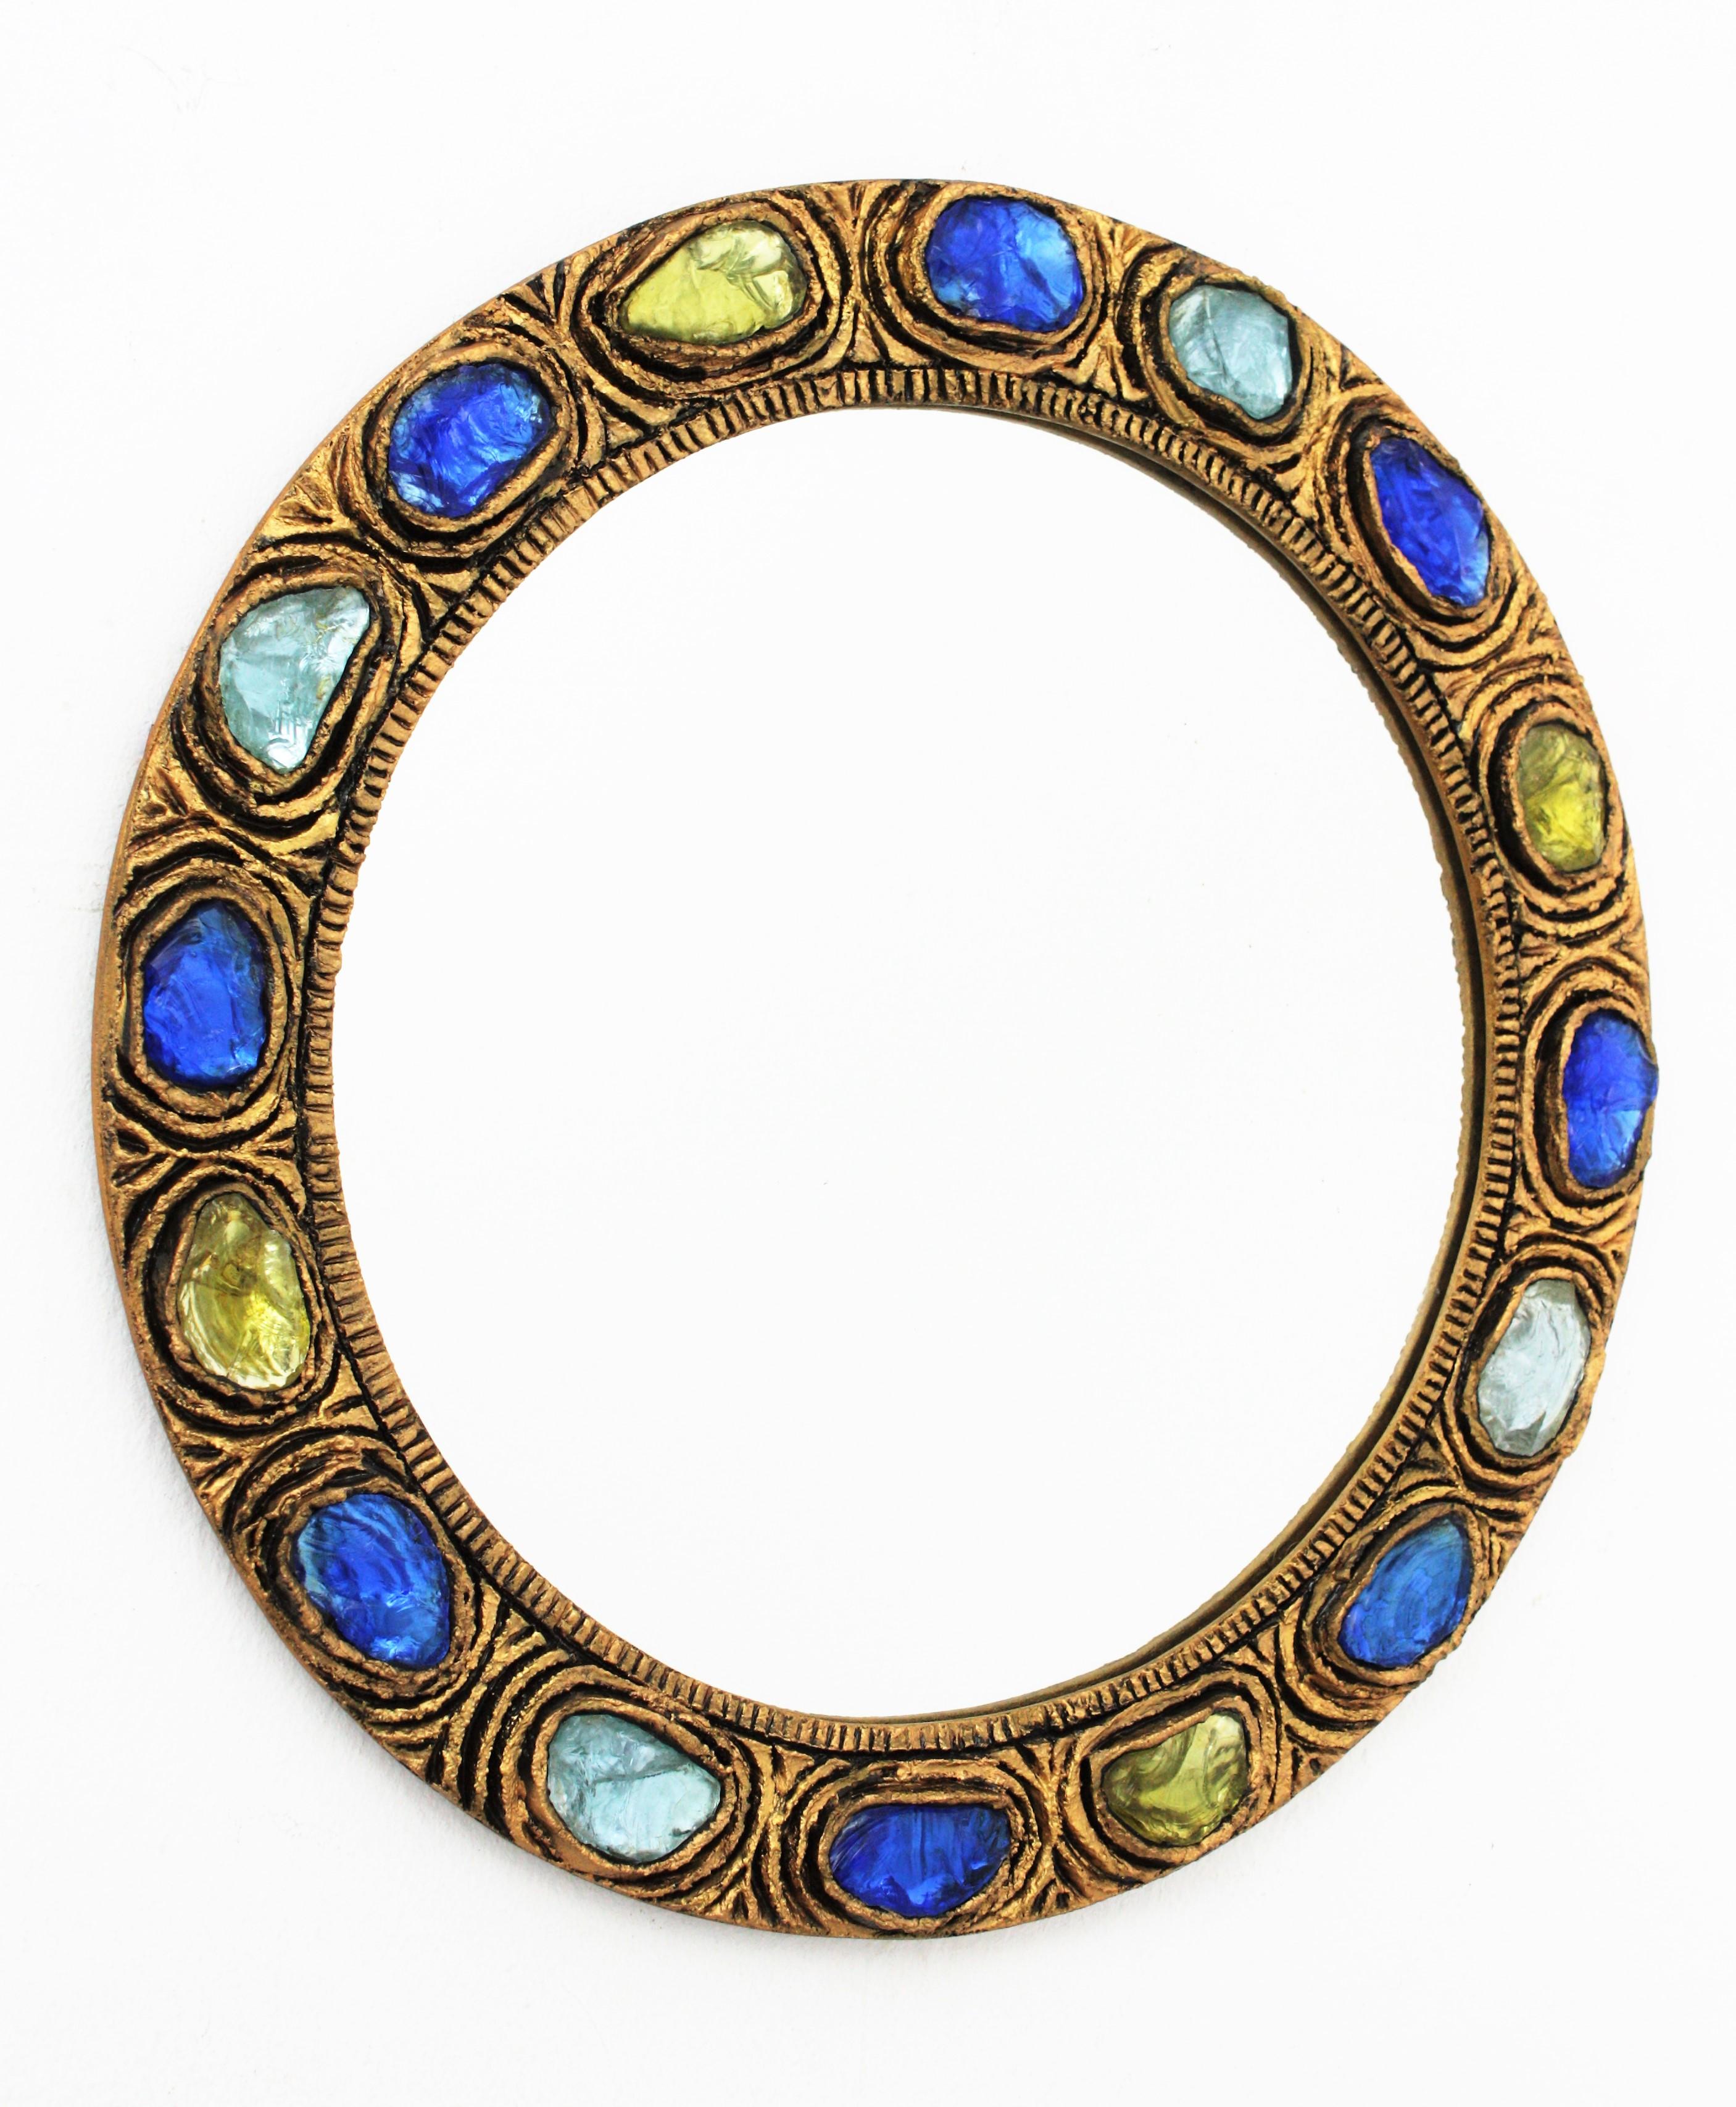 Round Wall Mirror with Blue, Yellow and Turquoise Rock Crystals 6